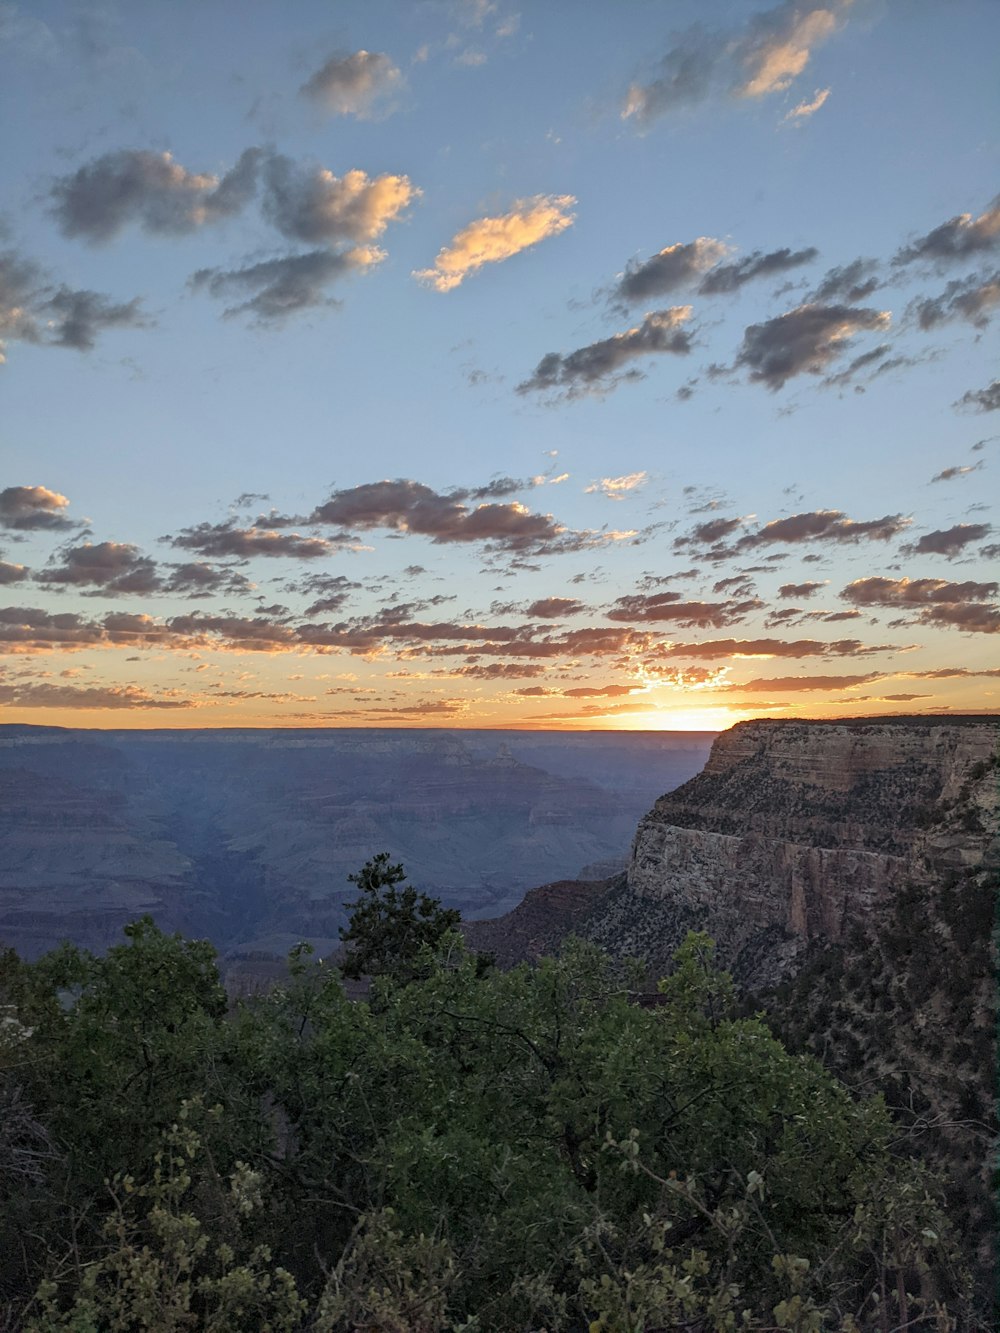 the sun is setting over the grand canyon